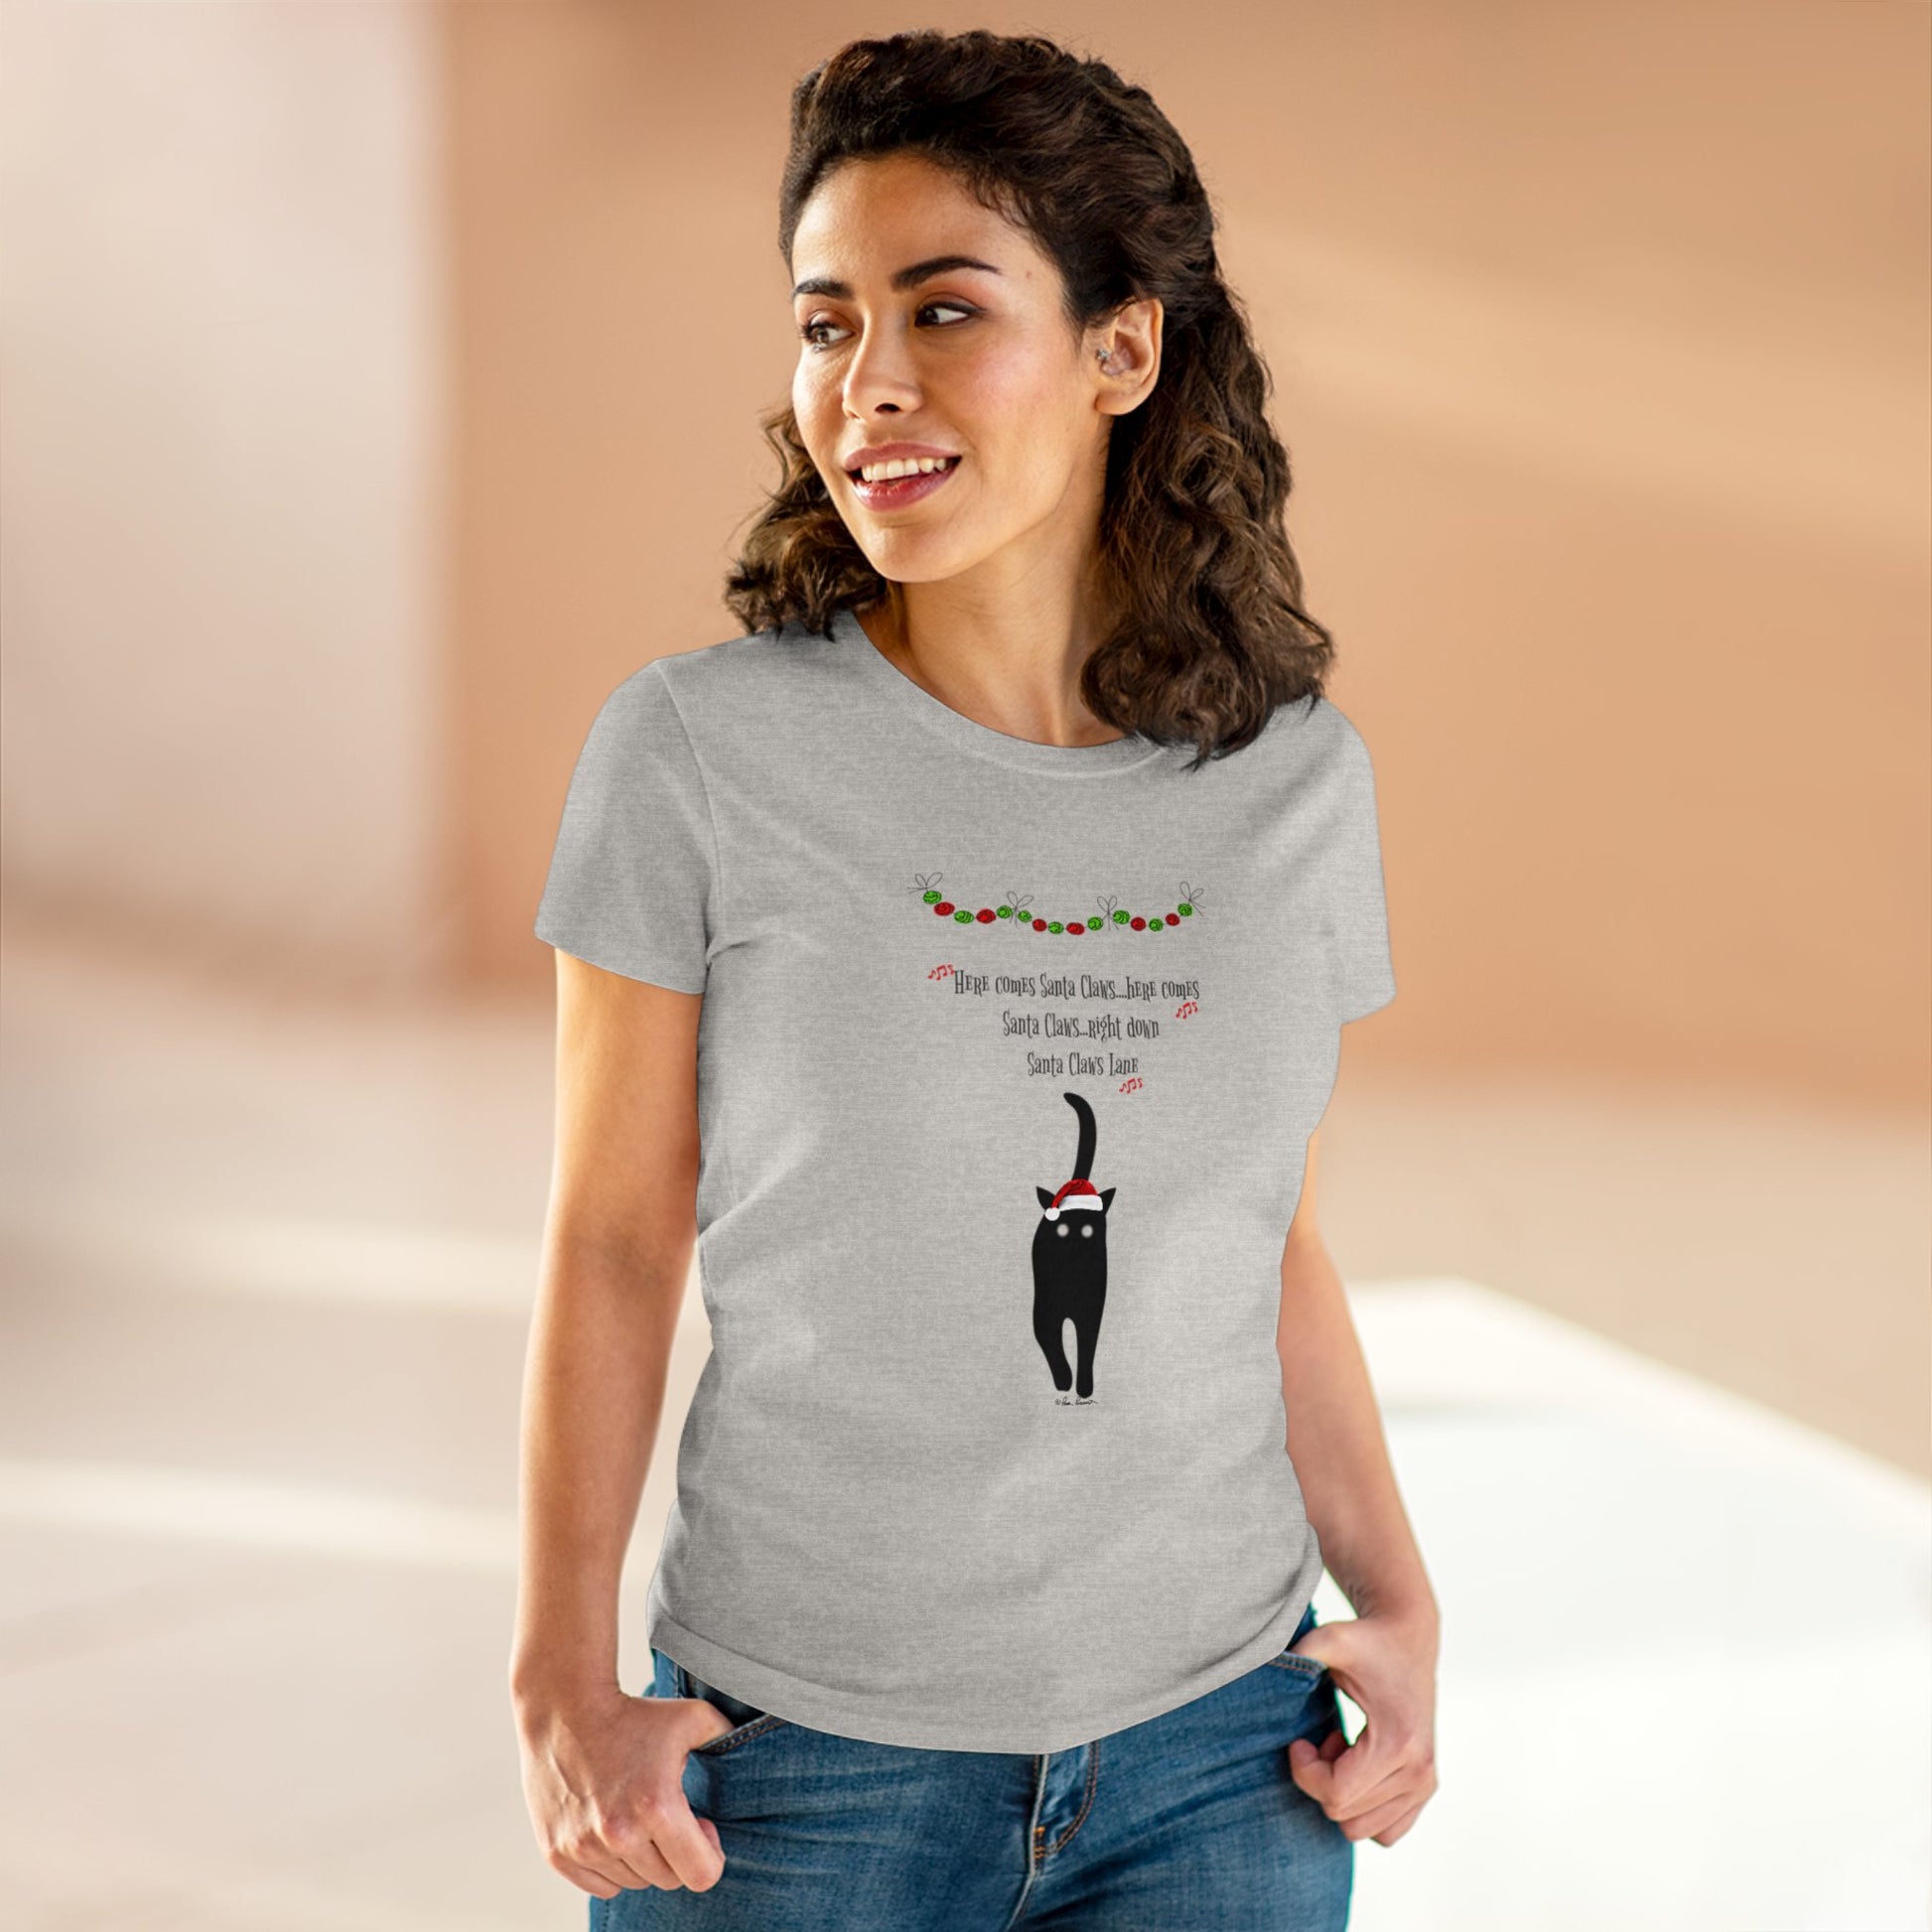 Mock up of the Ash Grey t-shirt on a woman